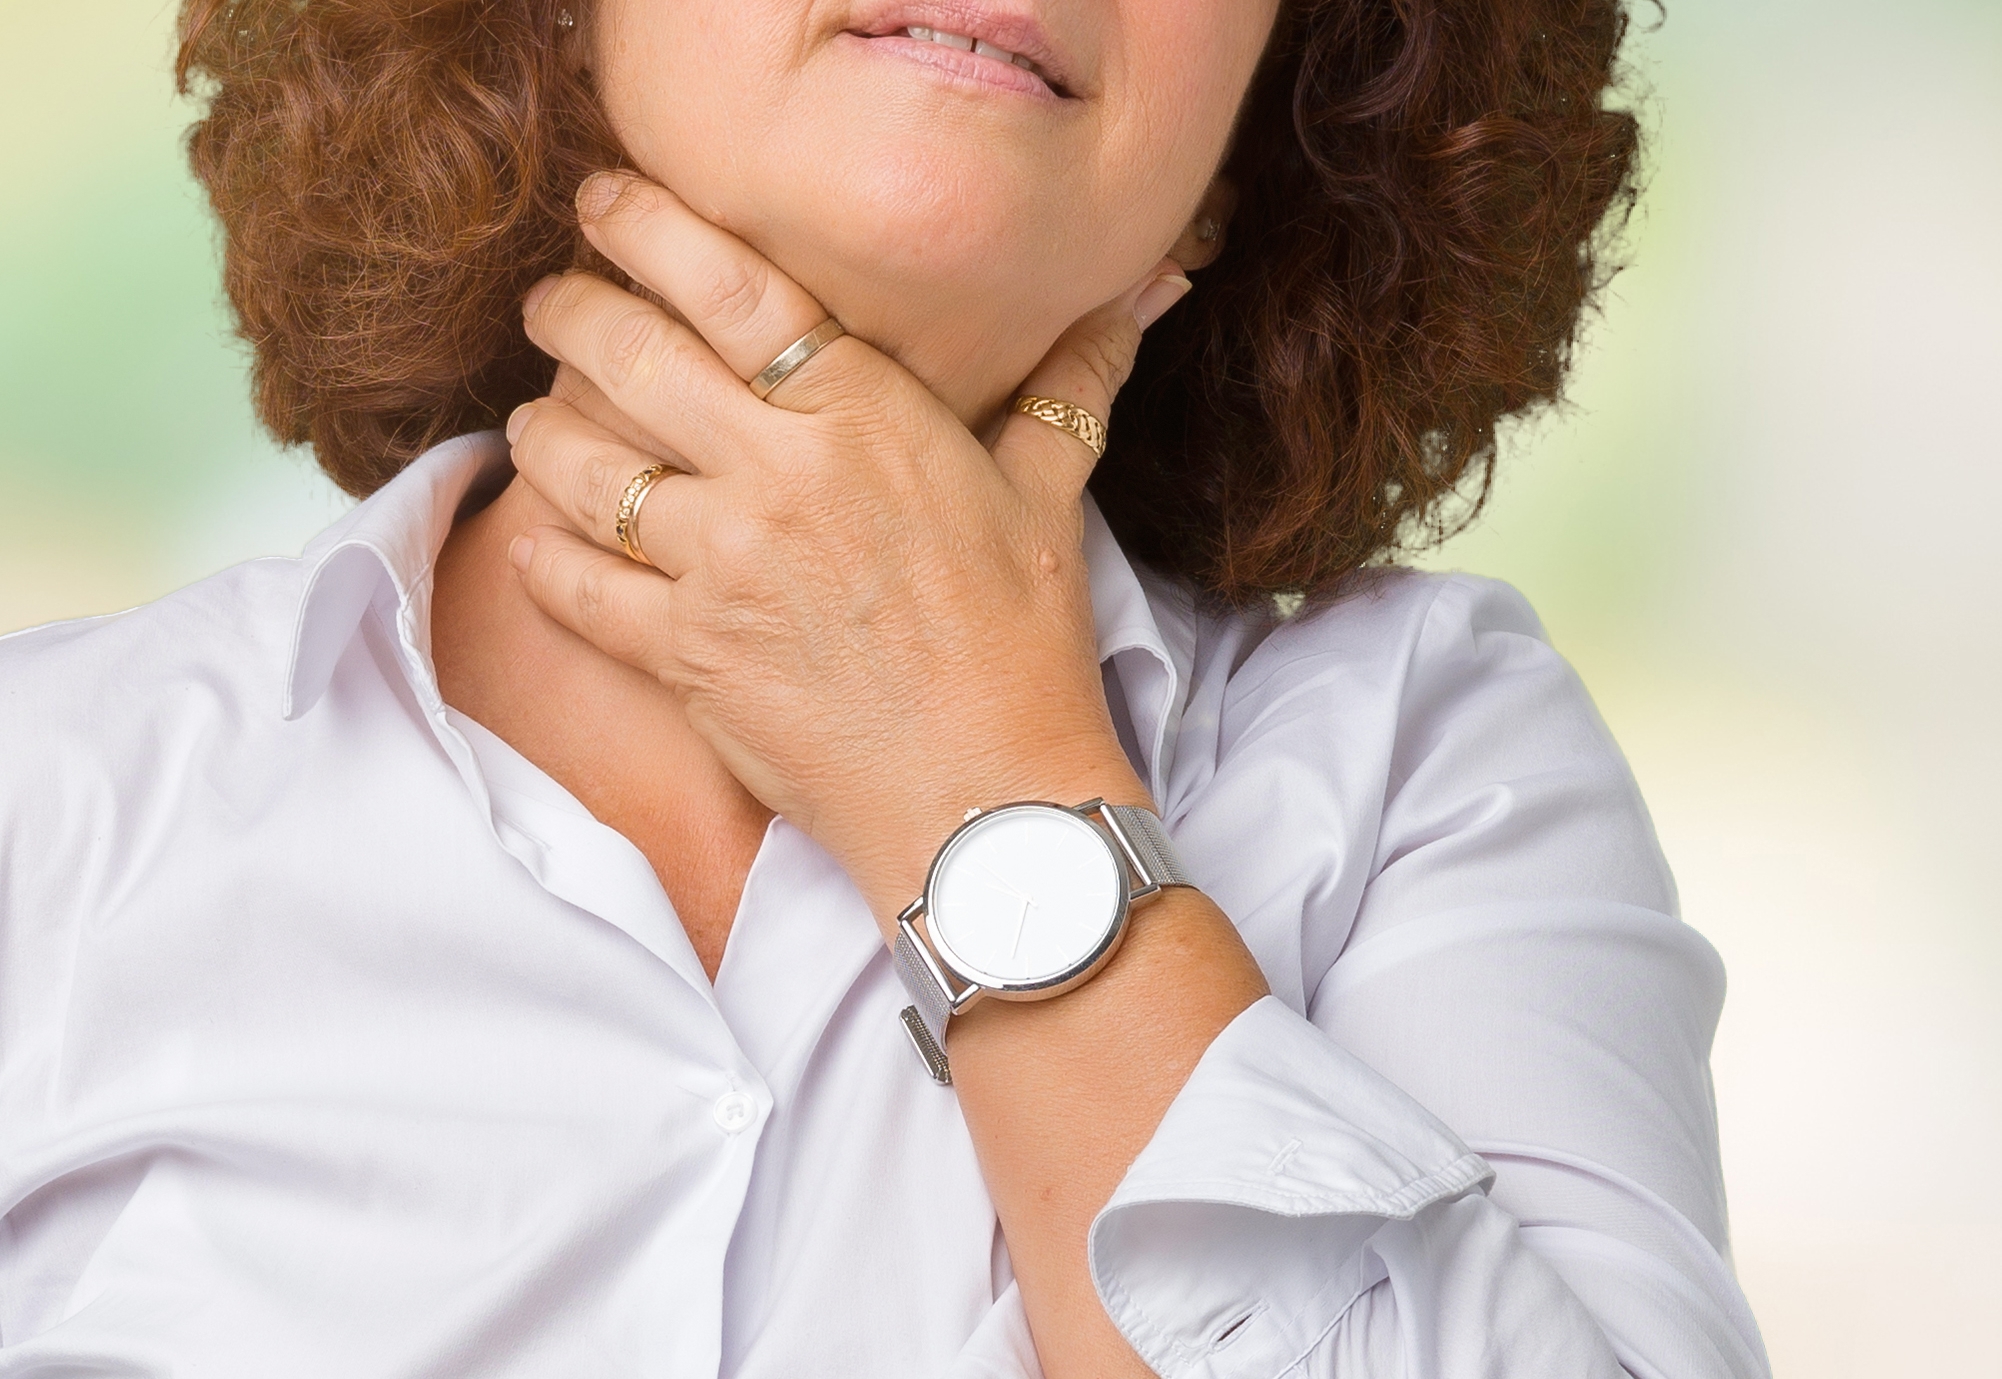 How Does Esophageal Cancer Cause a Hoarse Voice?